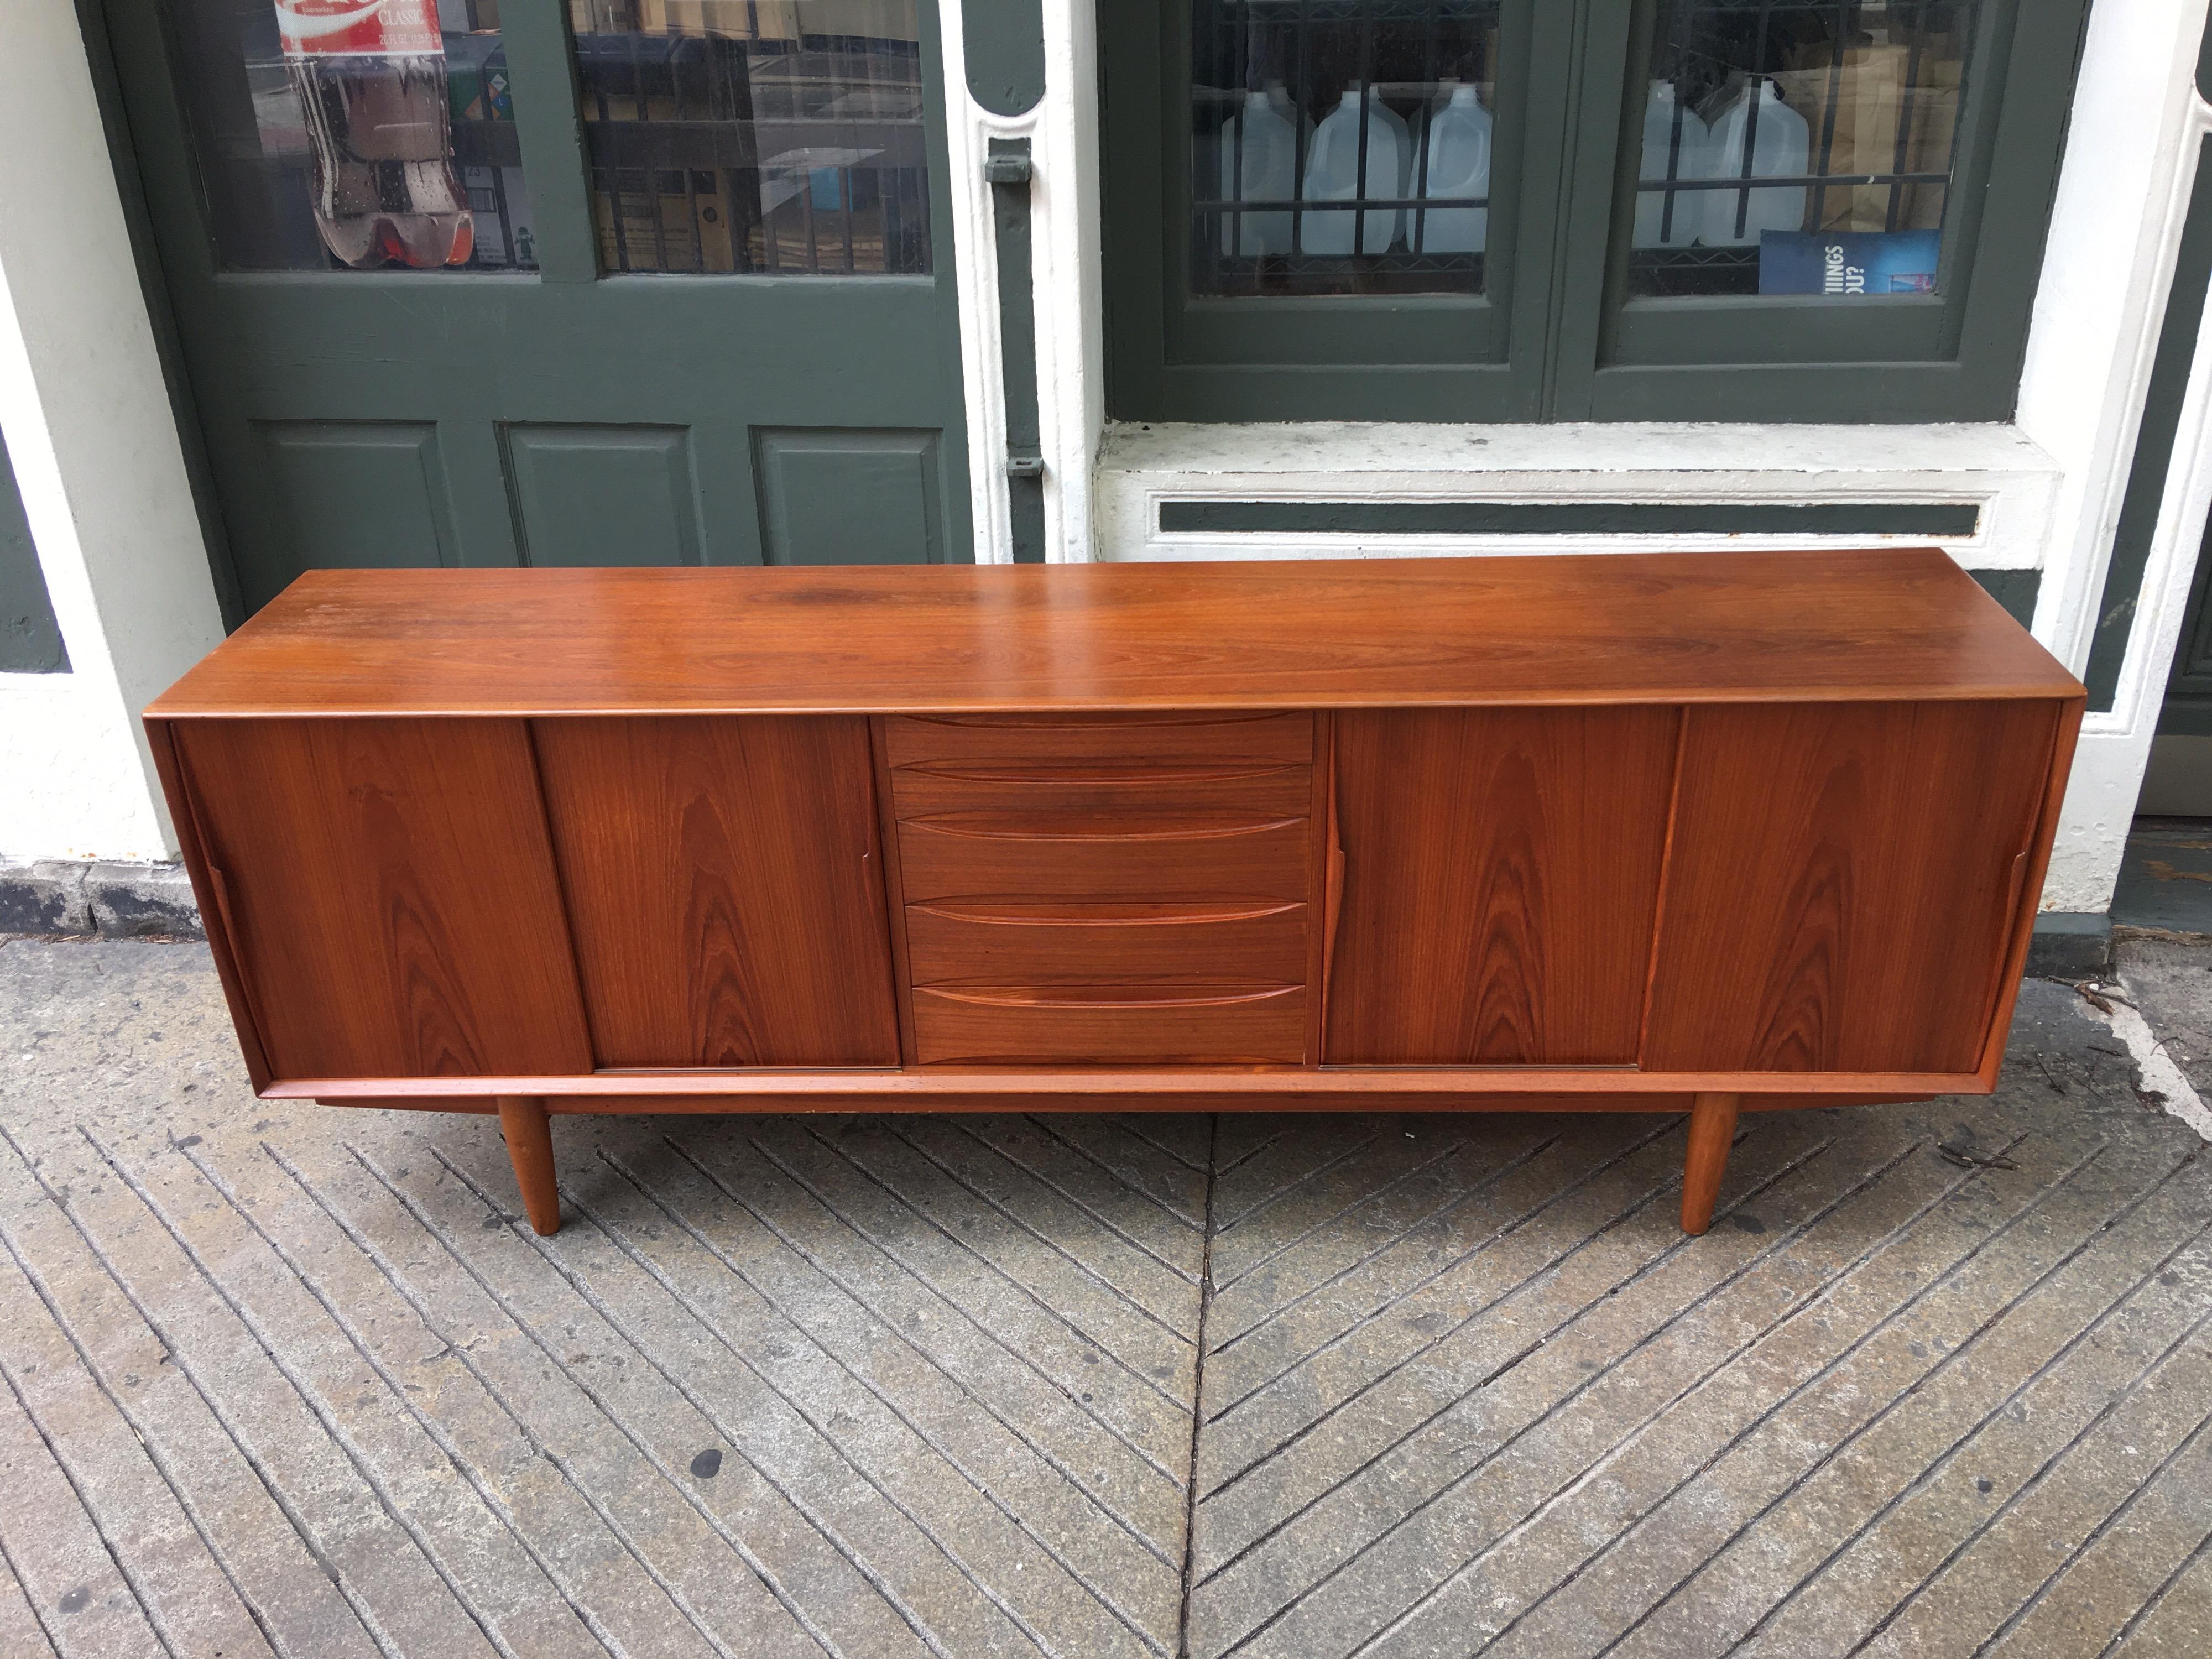 Arne Vodder teak credenza, newly cleaned and re-oiled! Nice large size, measuring 86.5 long, 18.5 deep and 31.5 tall. Beautiful grain with sliding doors on ends to reveal open shelves, and 5 drawers in the center. Top 2 drawers lined in felt. Very